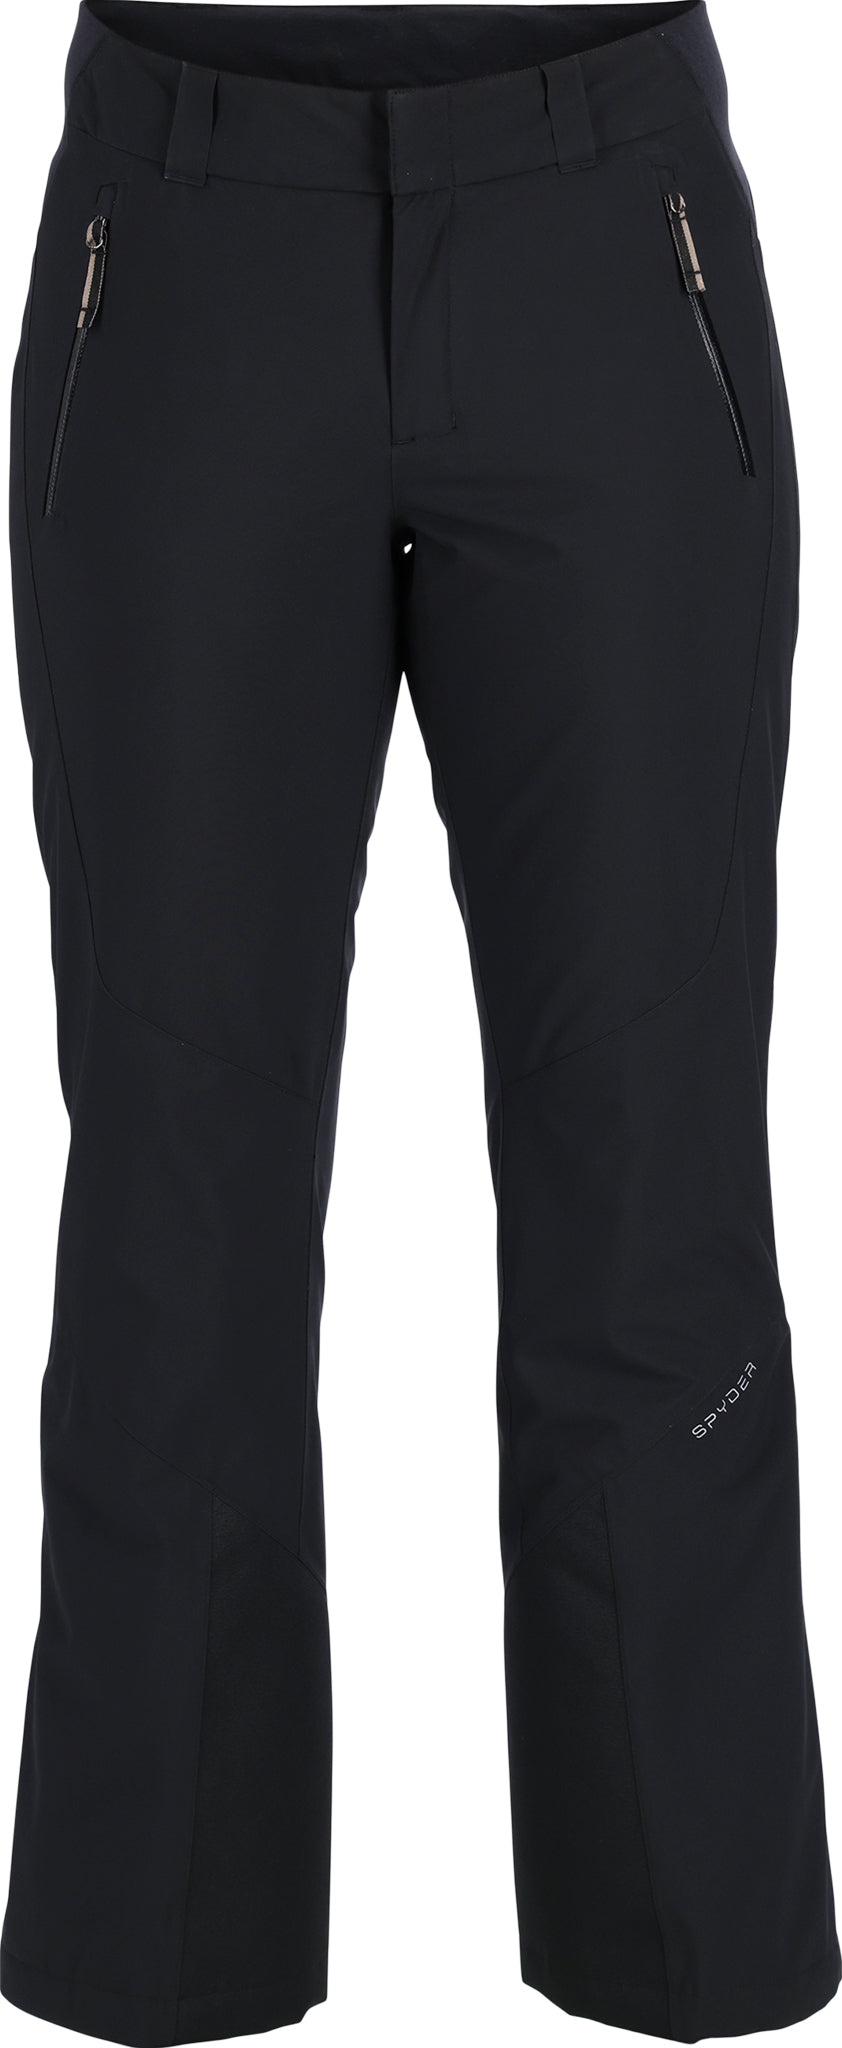 Spyder ORB Pant Women Ski Pants - Pants - Outdoor Clothing - Outdoor - All